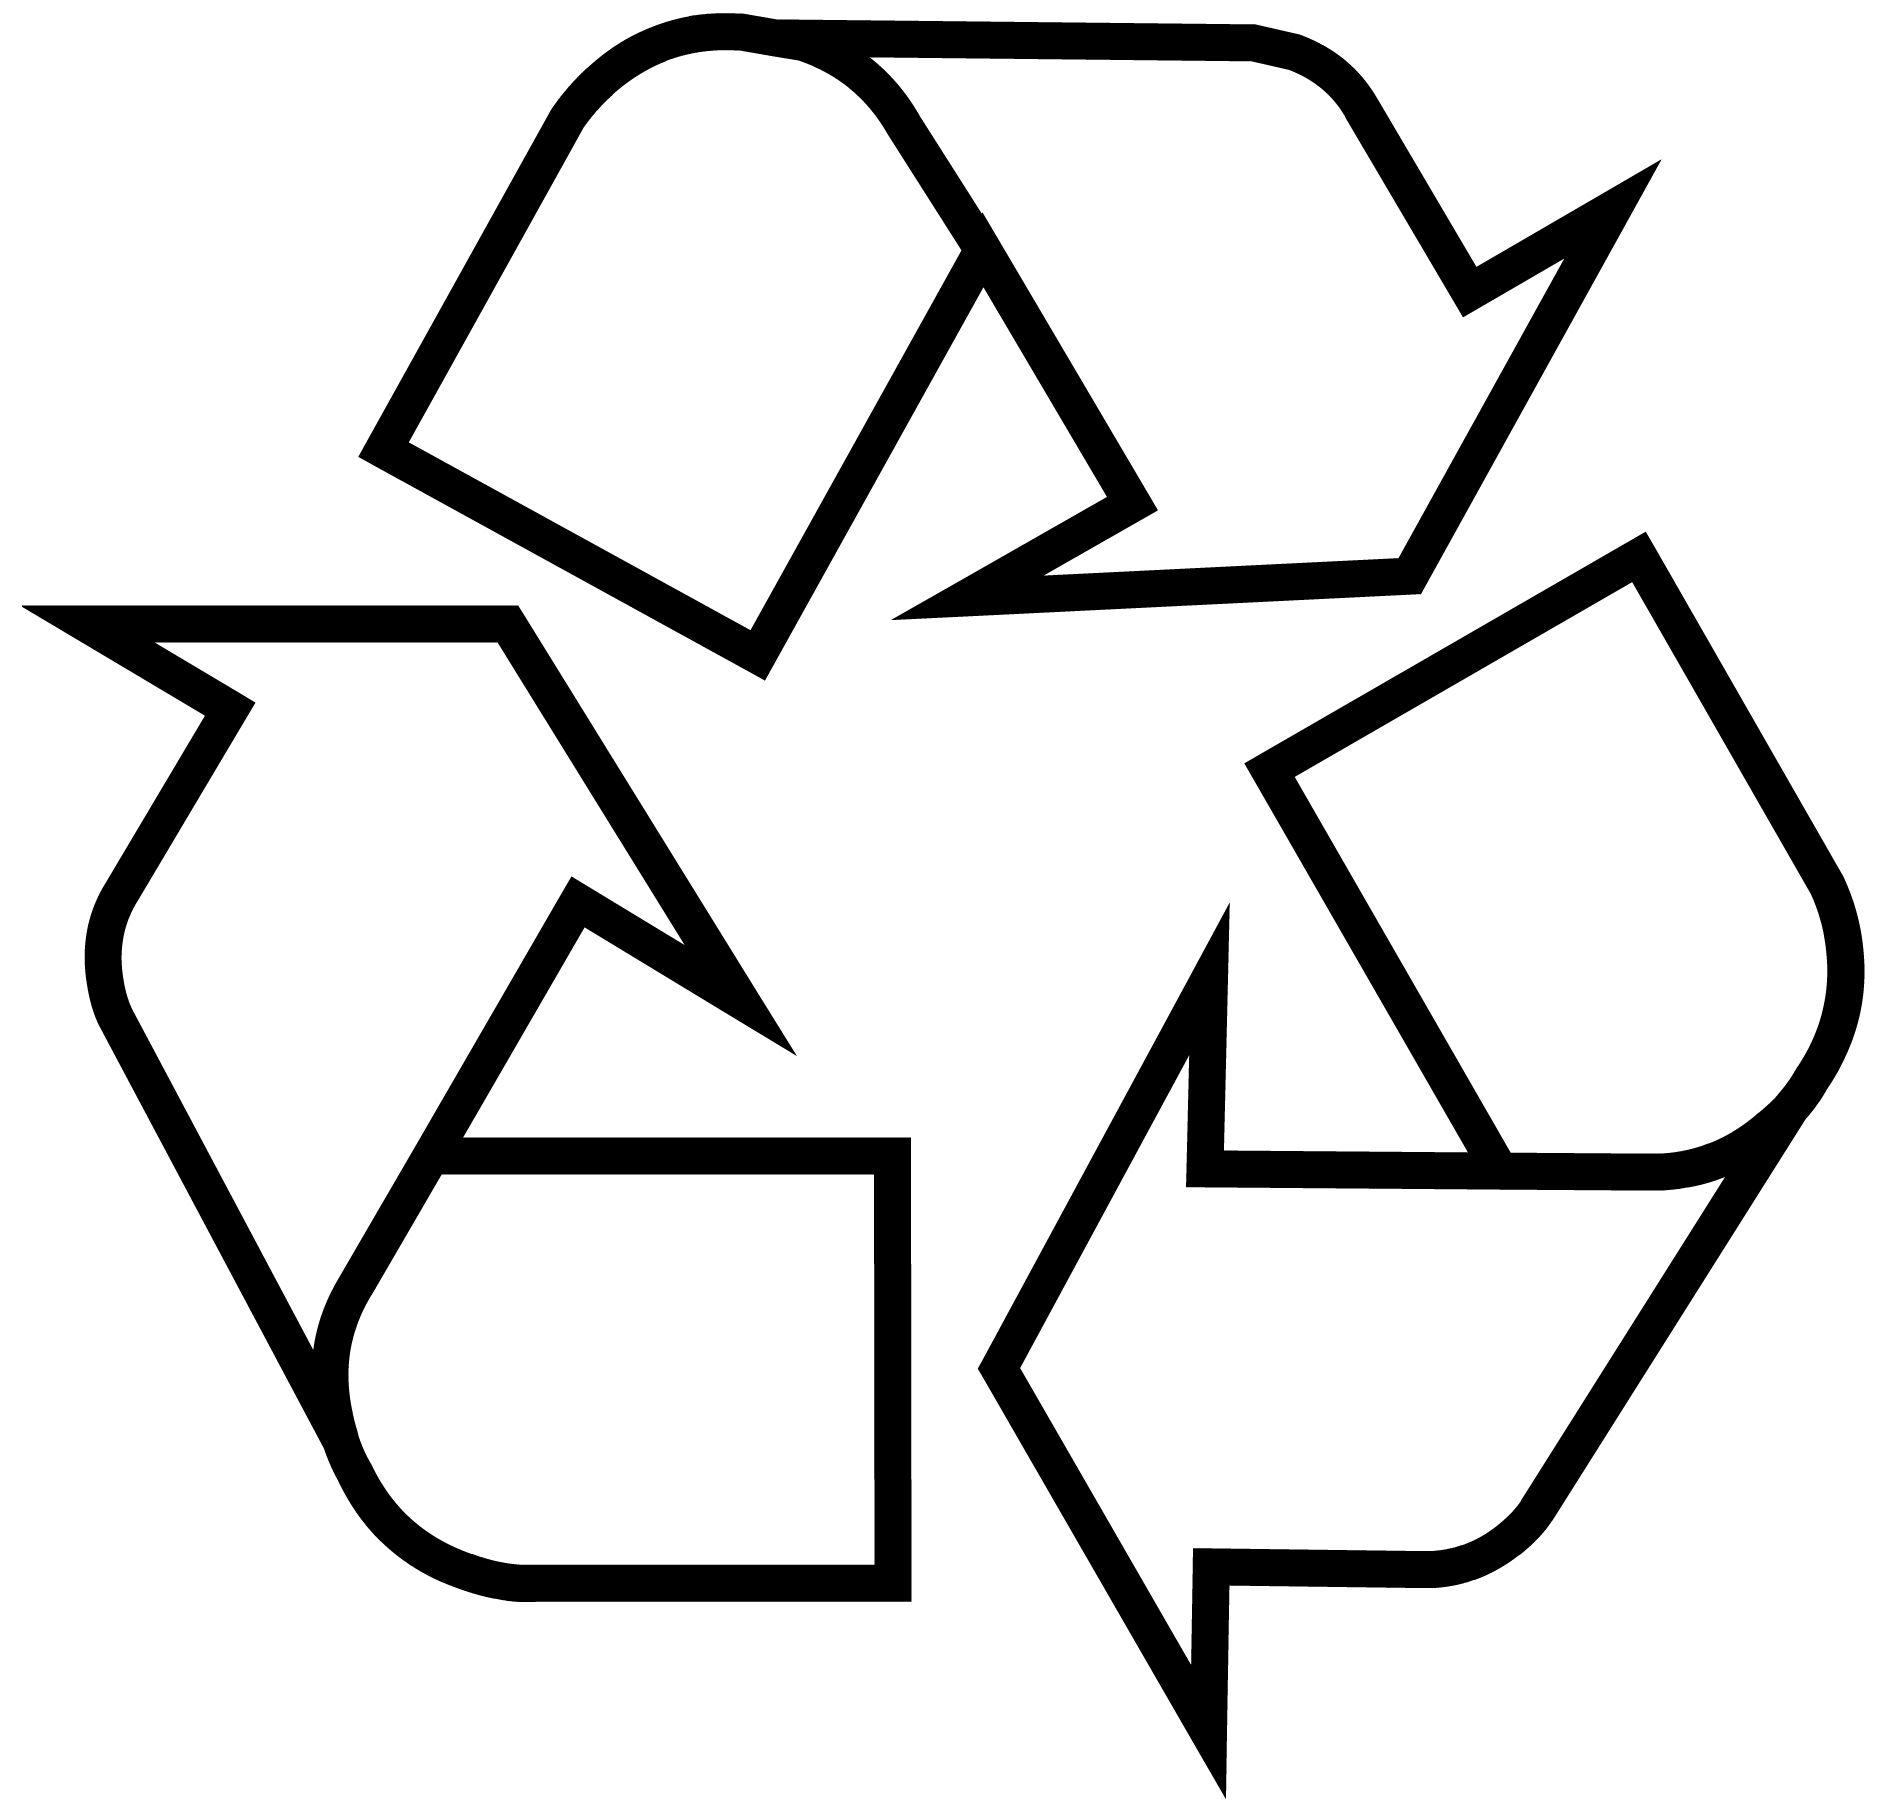 Please Recycle Logo - Recycling Symbol - Download the Original Recycle Logo